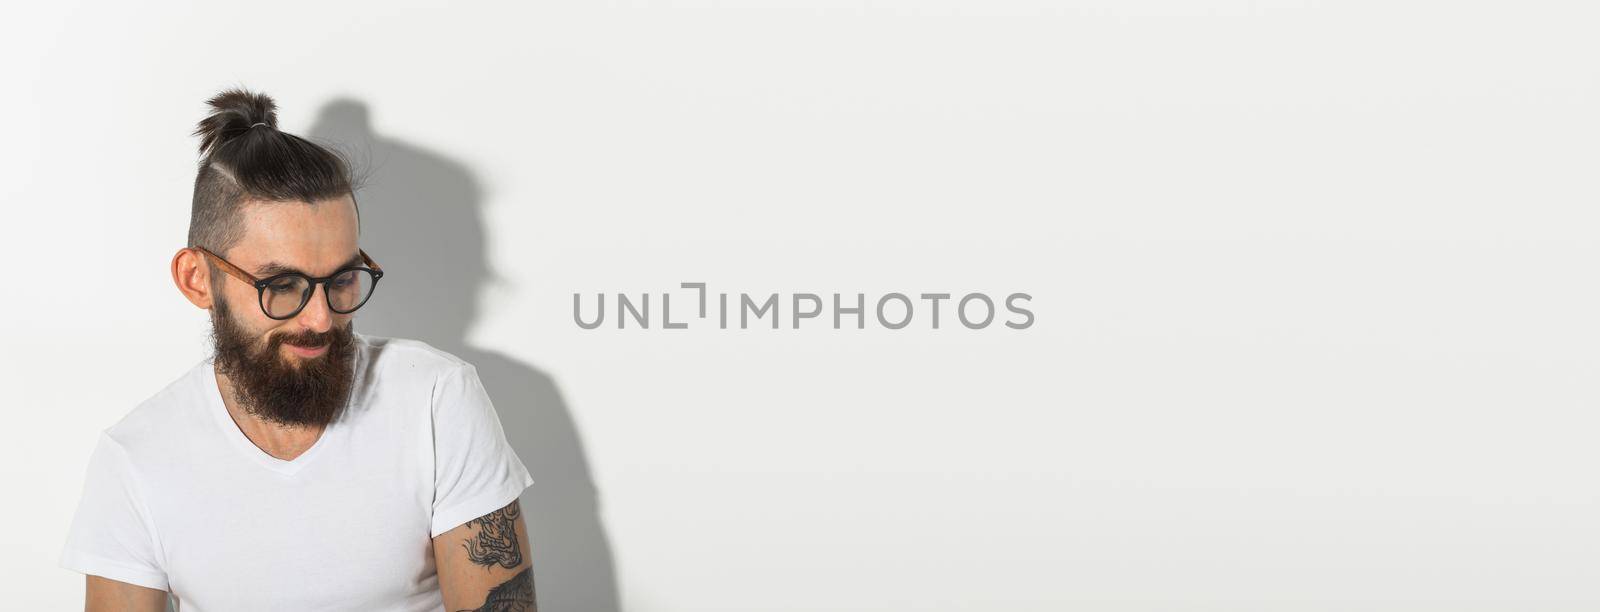 Beauty, fashion and people concept - portrait of hipster man with beard over white background banner with copy space and place for advertising by Satura86